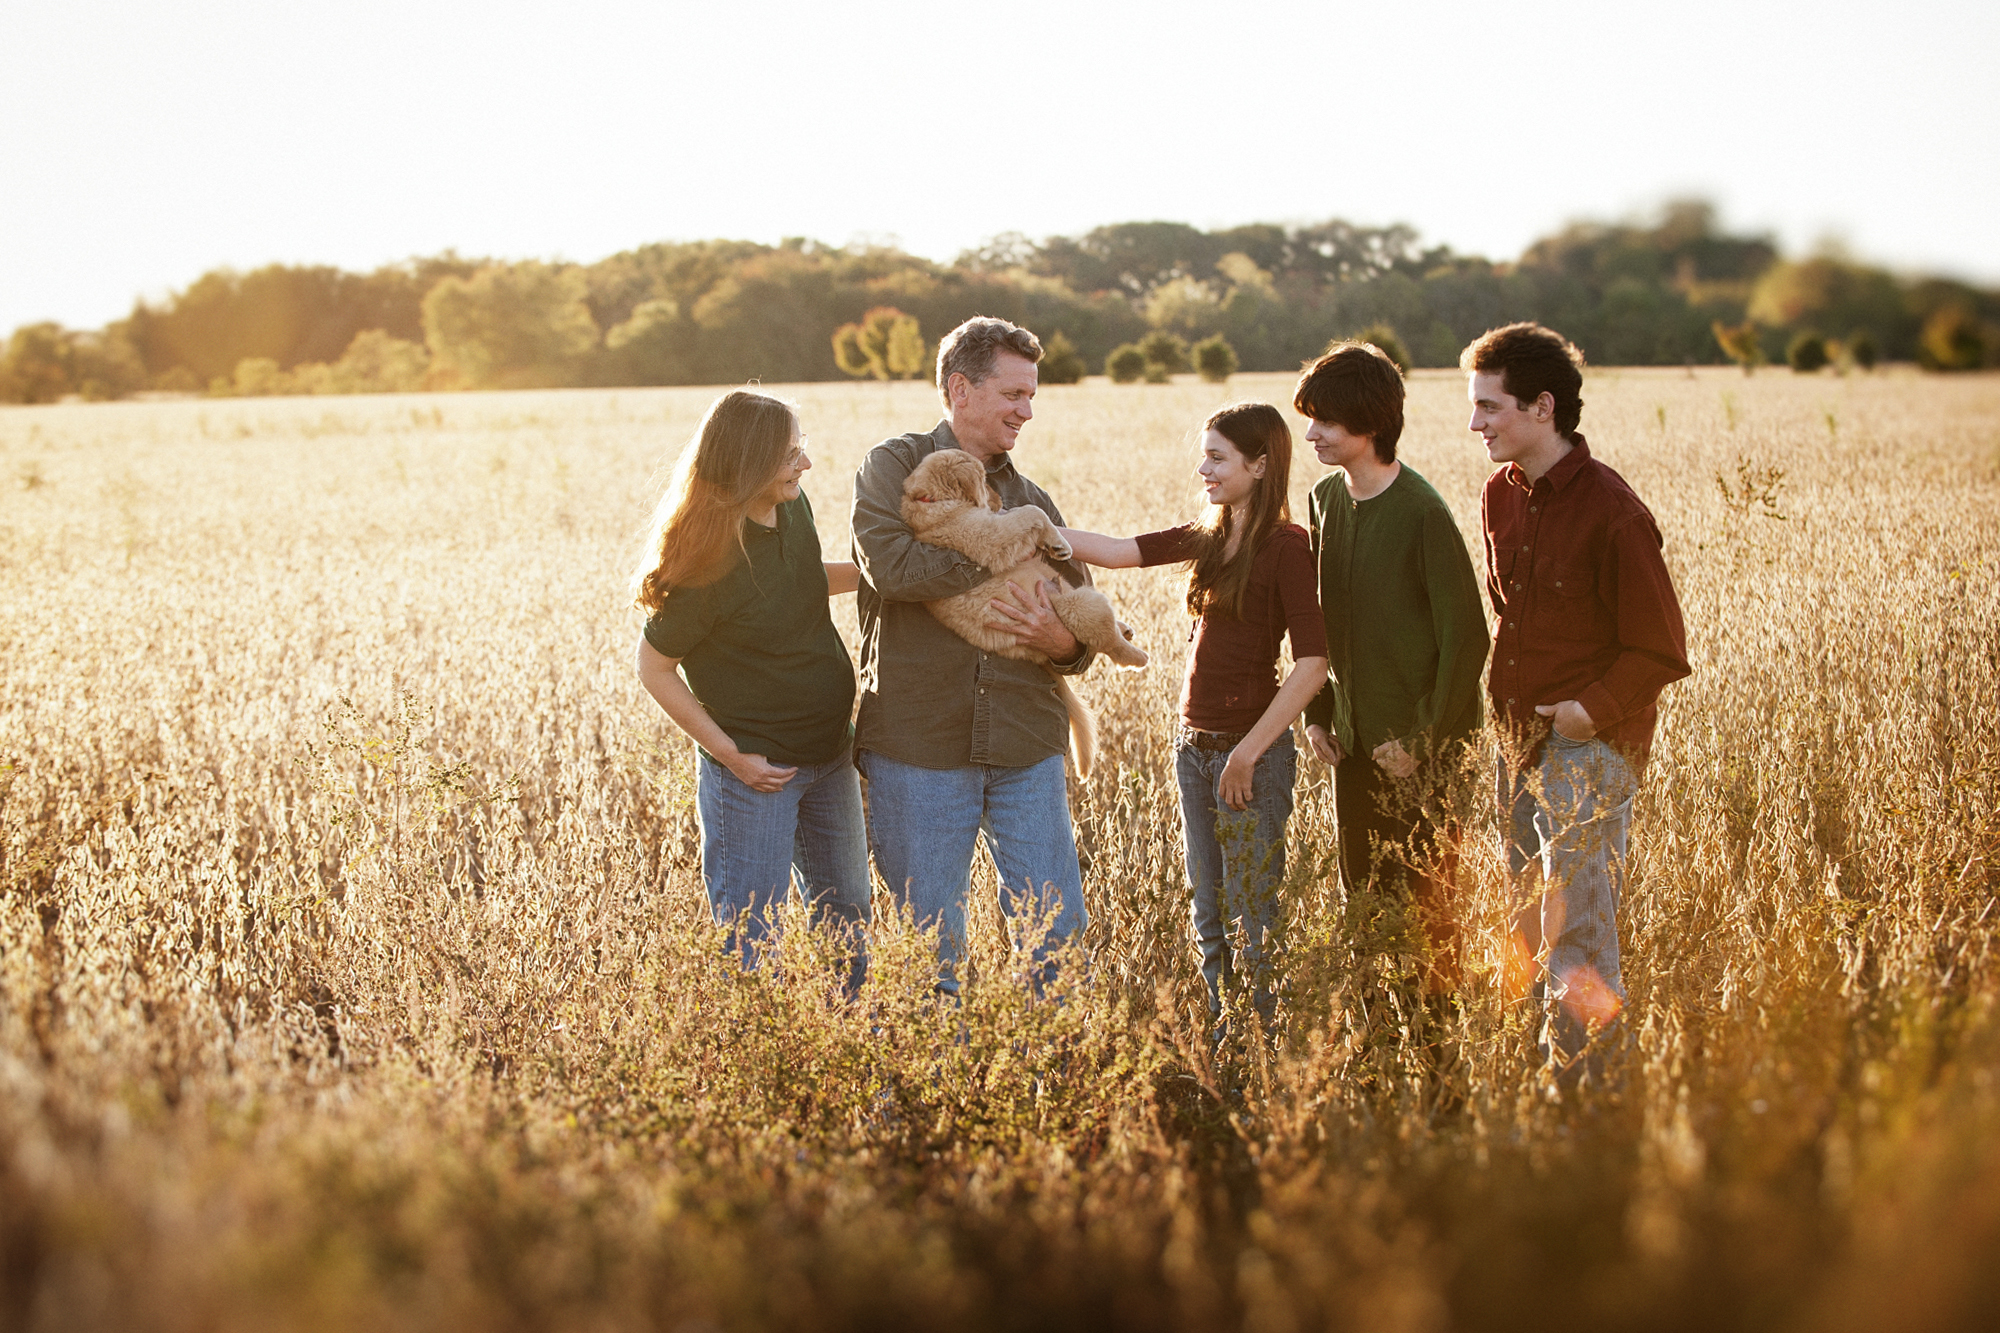 Family Photographer in Moorestown New Jersey